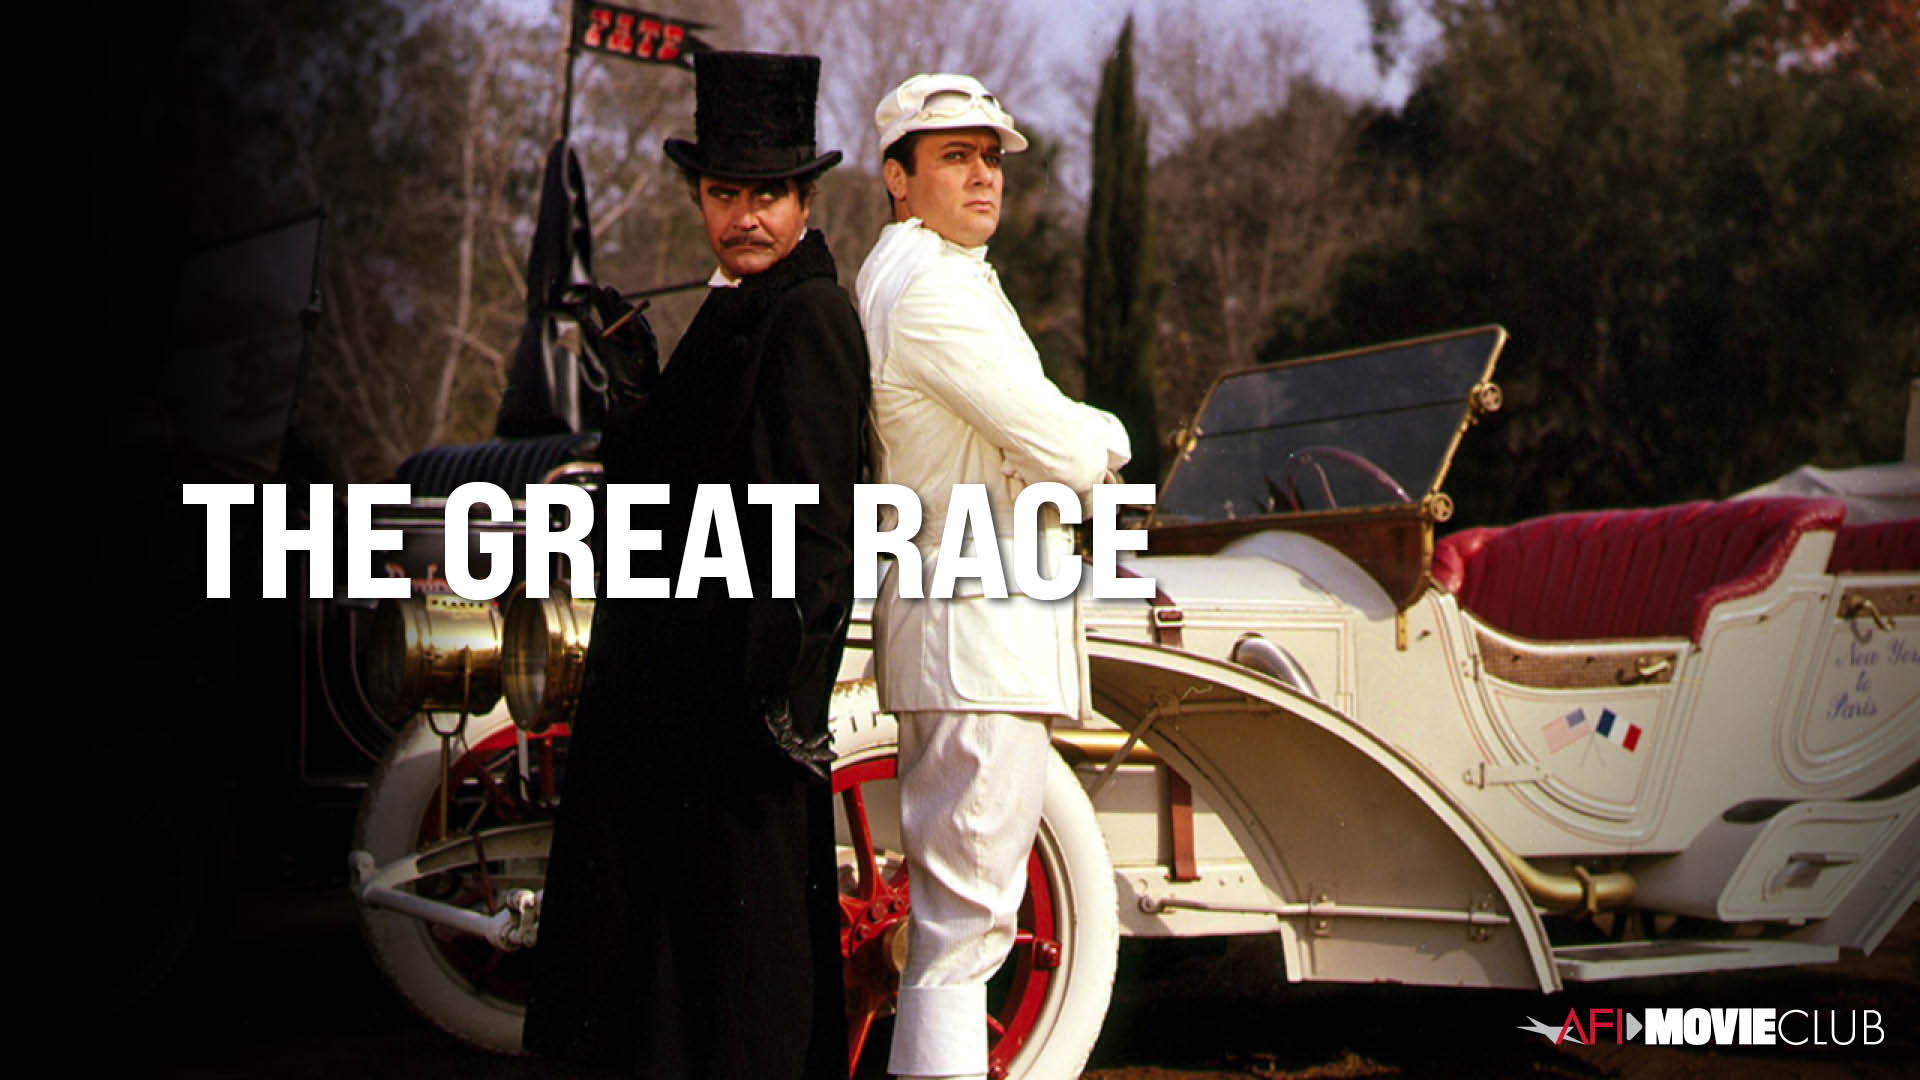 The Great Race Film Still - Tony Curtis and Jack Lemmon